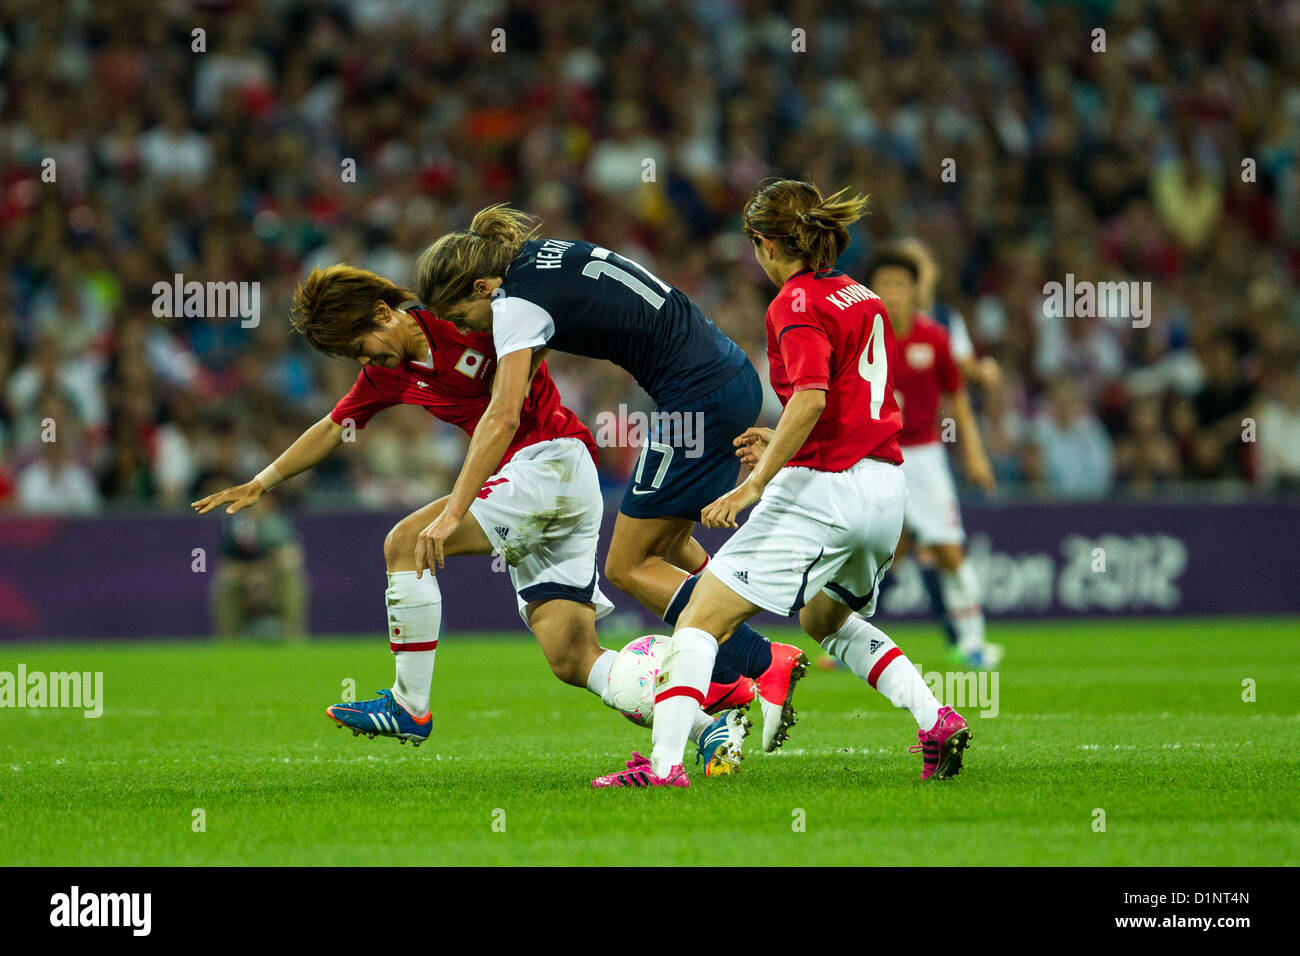 Tobin Heath (USA) 17, USA wins gold over Japan in Women's Football (soccer) at the Olympic Summer Games, London 2012 Stock Photo